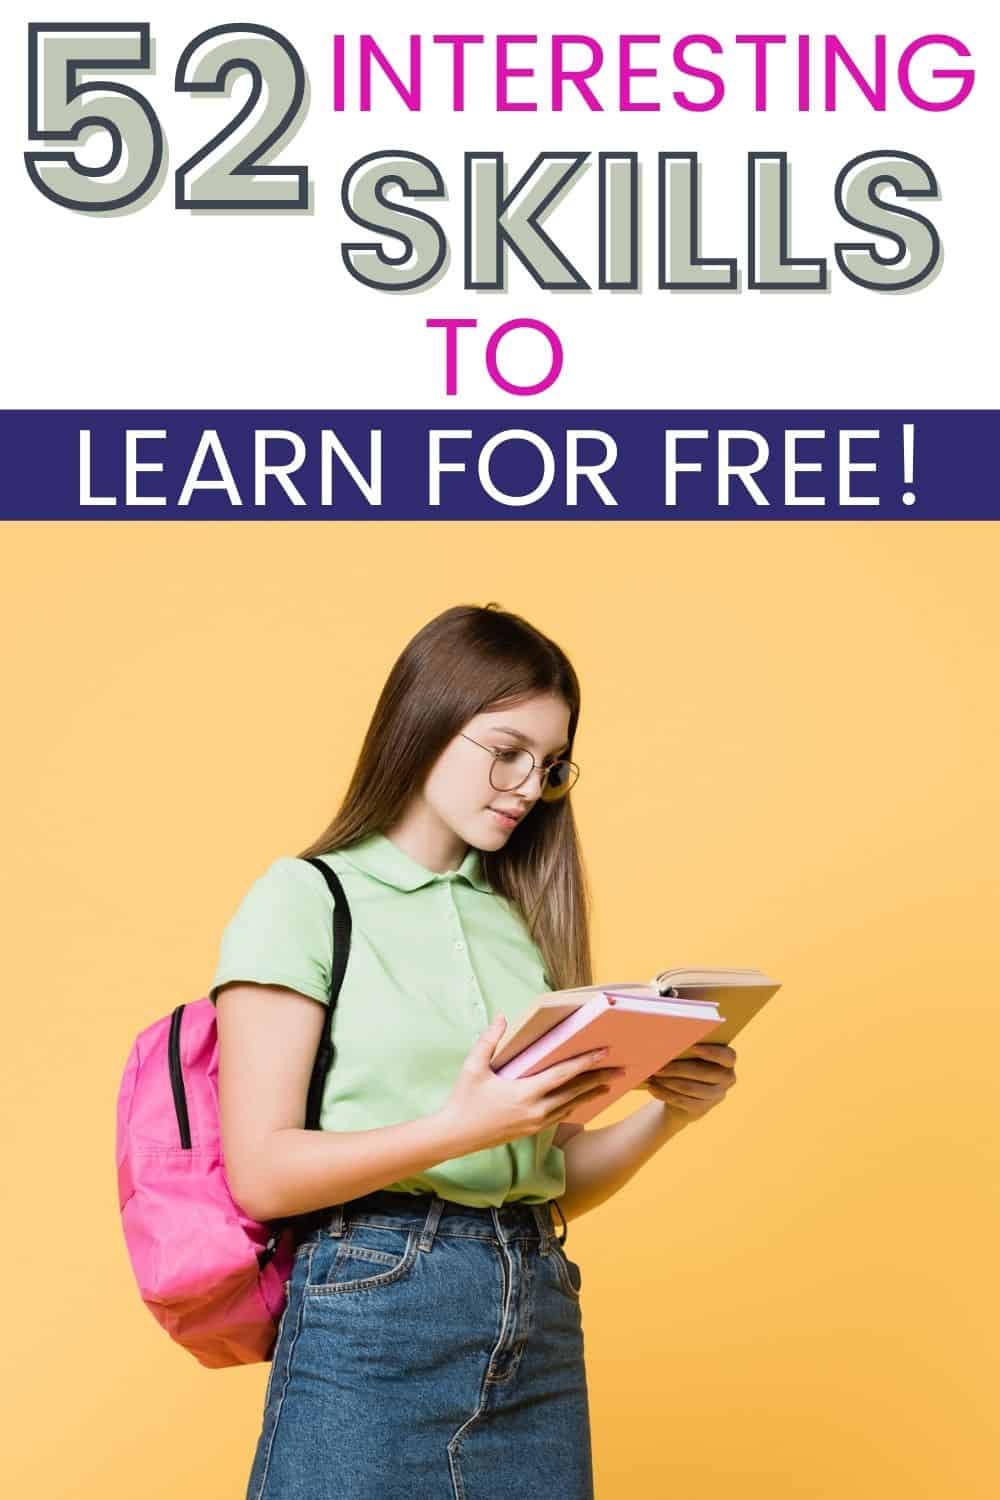 Skills to learn for free